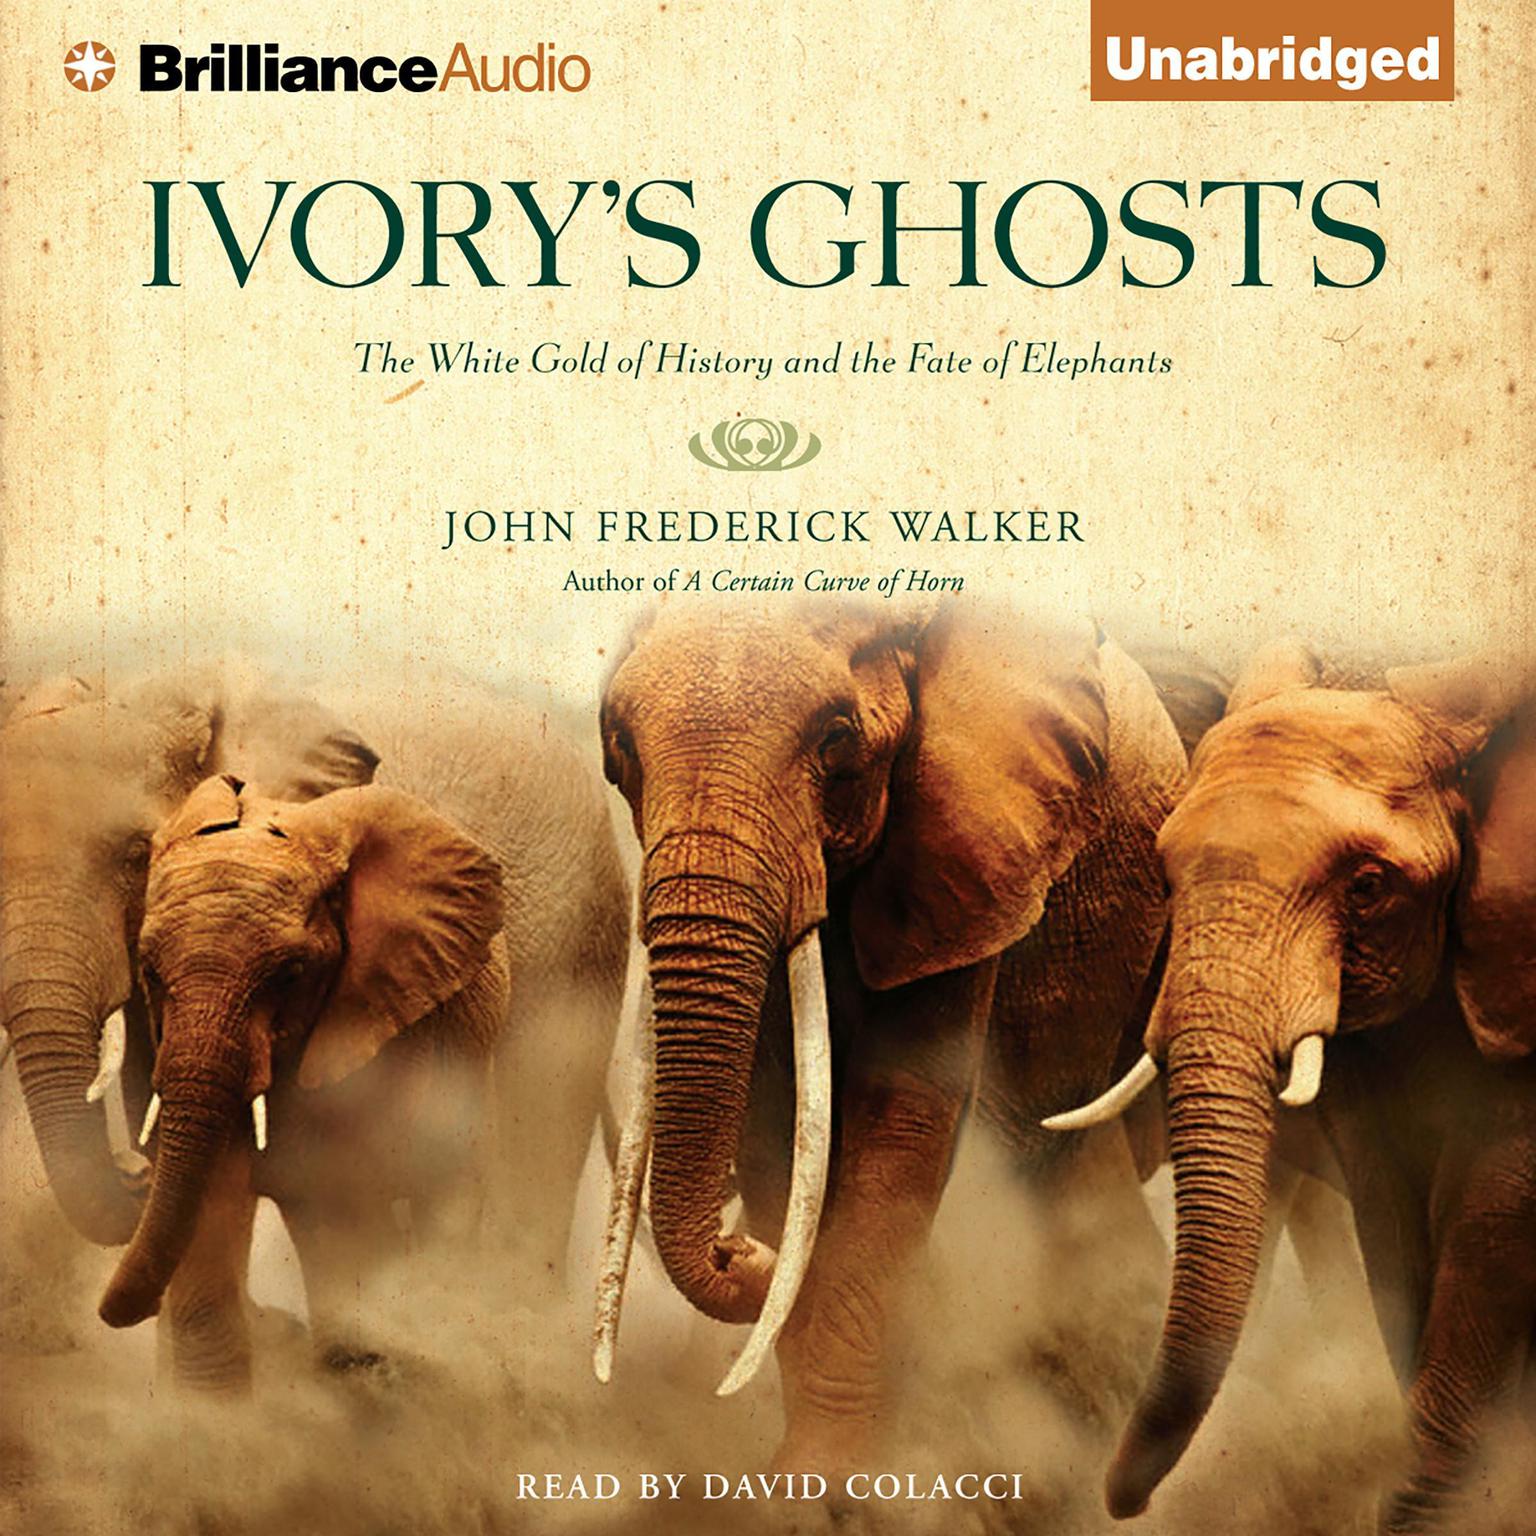 Ivorys Ghosts: The White Gold of History and the Fate of Elephants Audiobook, by John Frederick Walker